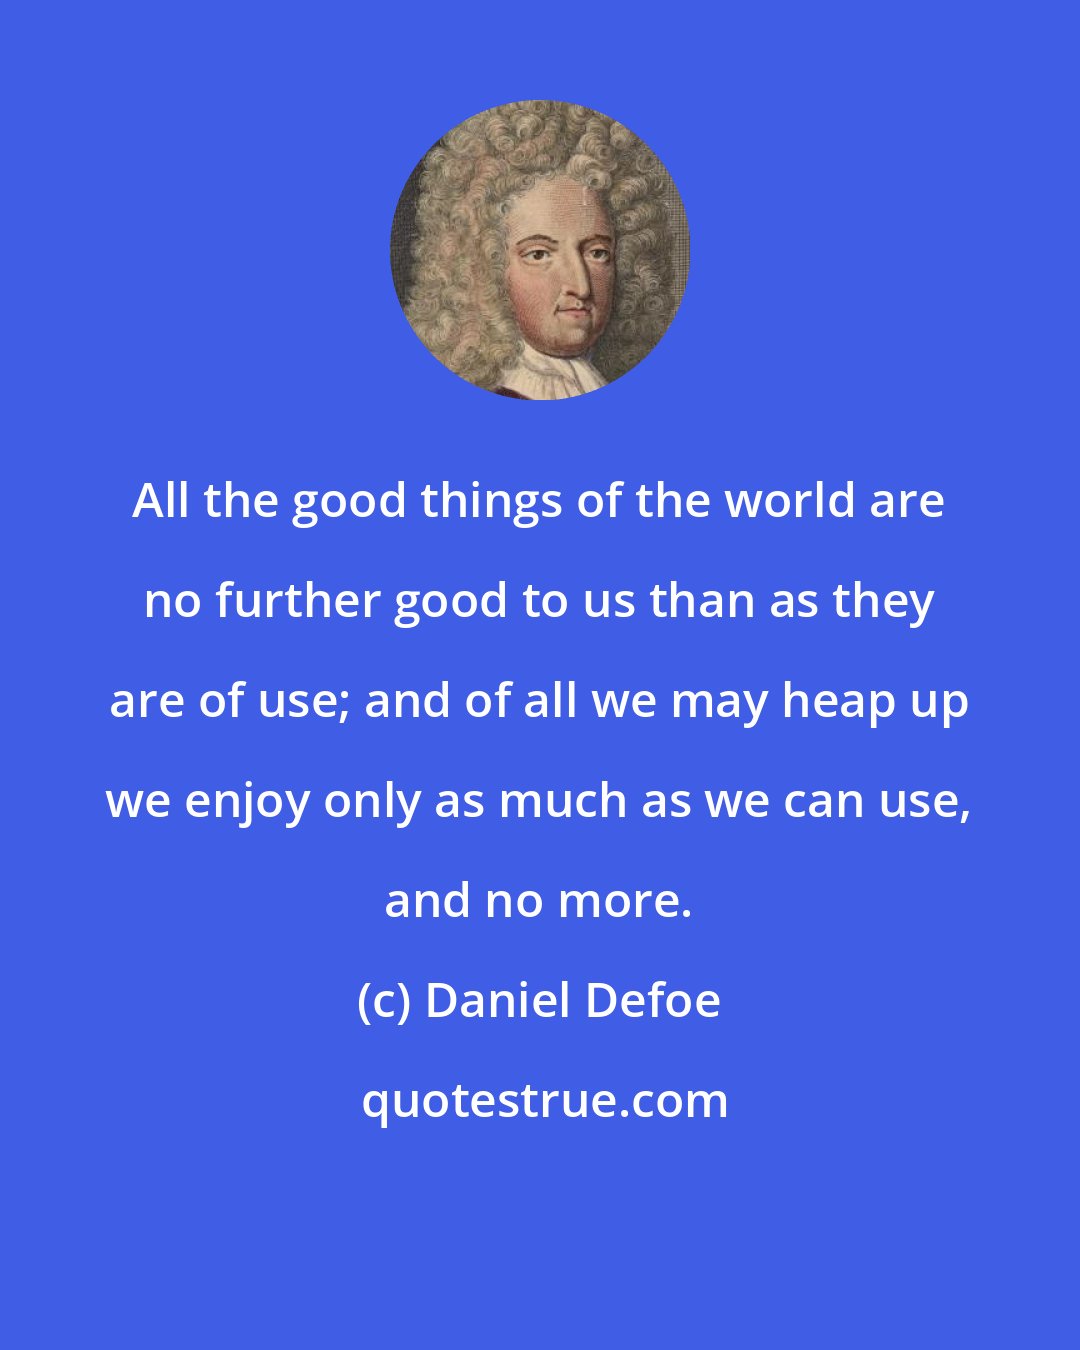 Daniel Defoe: All the good things of the world are no further good to us than as they are of use; and of all we may heap up we enjoy only as much as we can use, and no more.